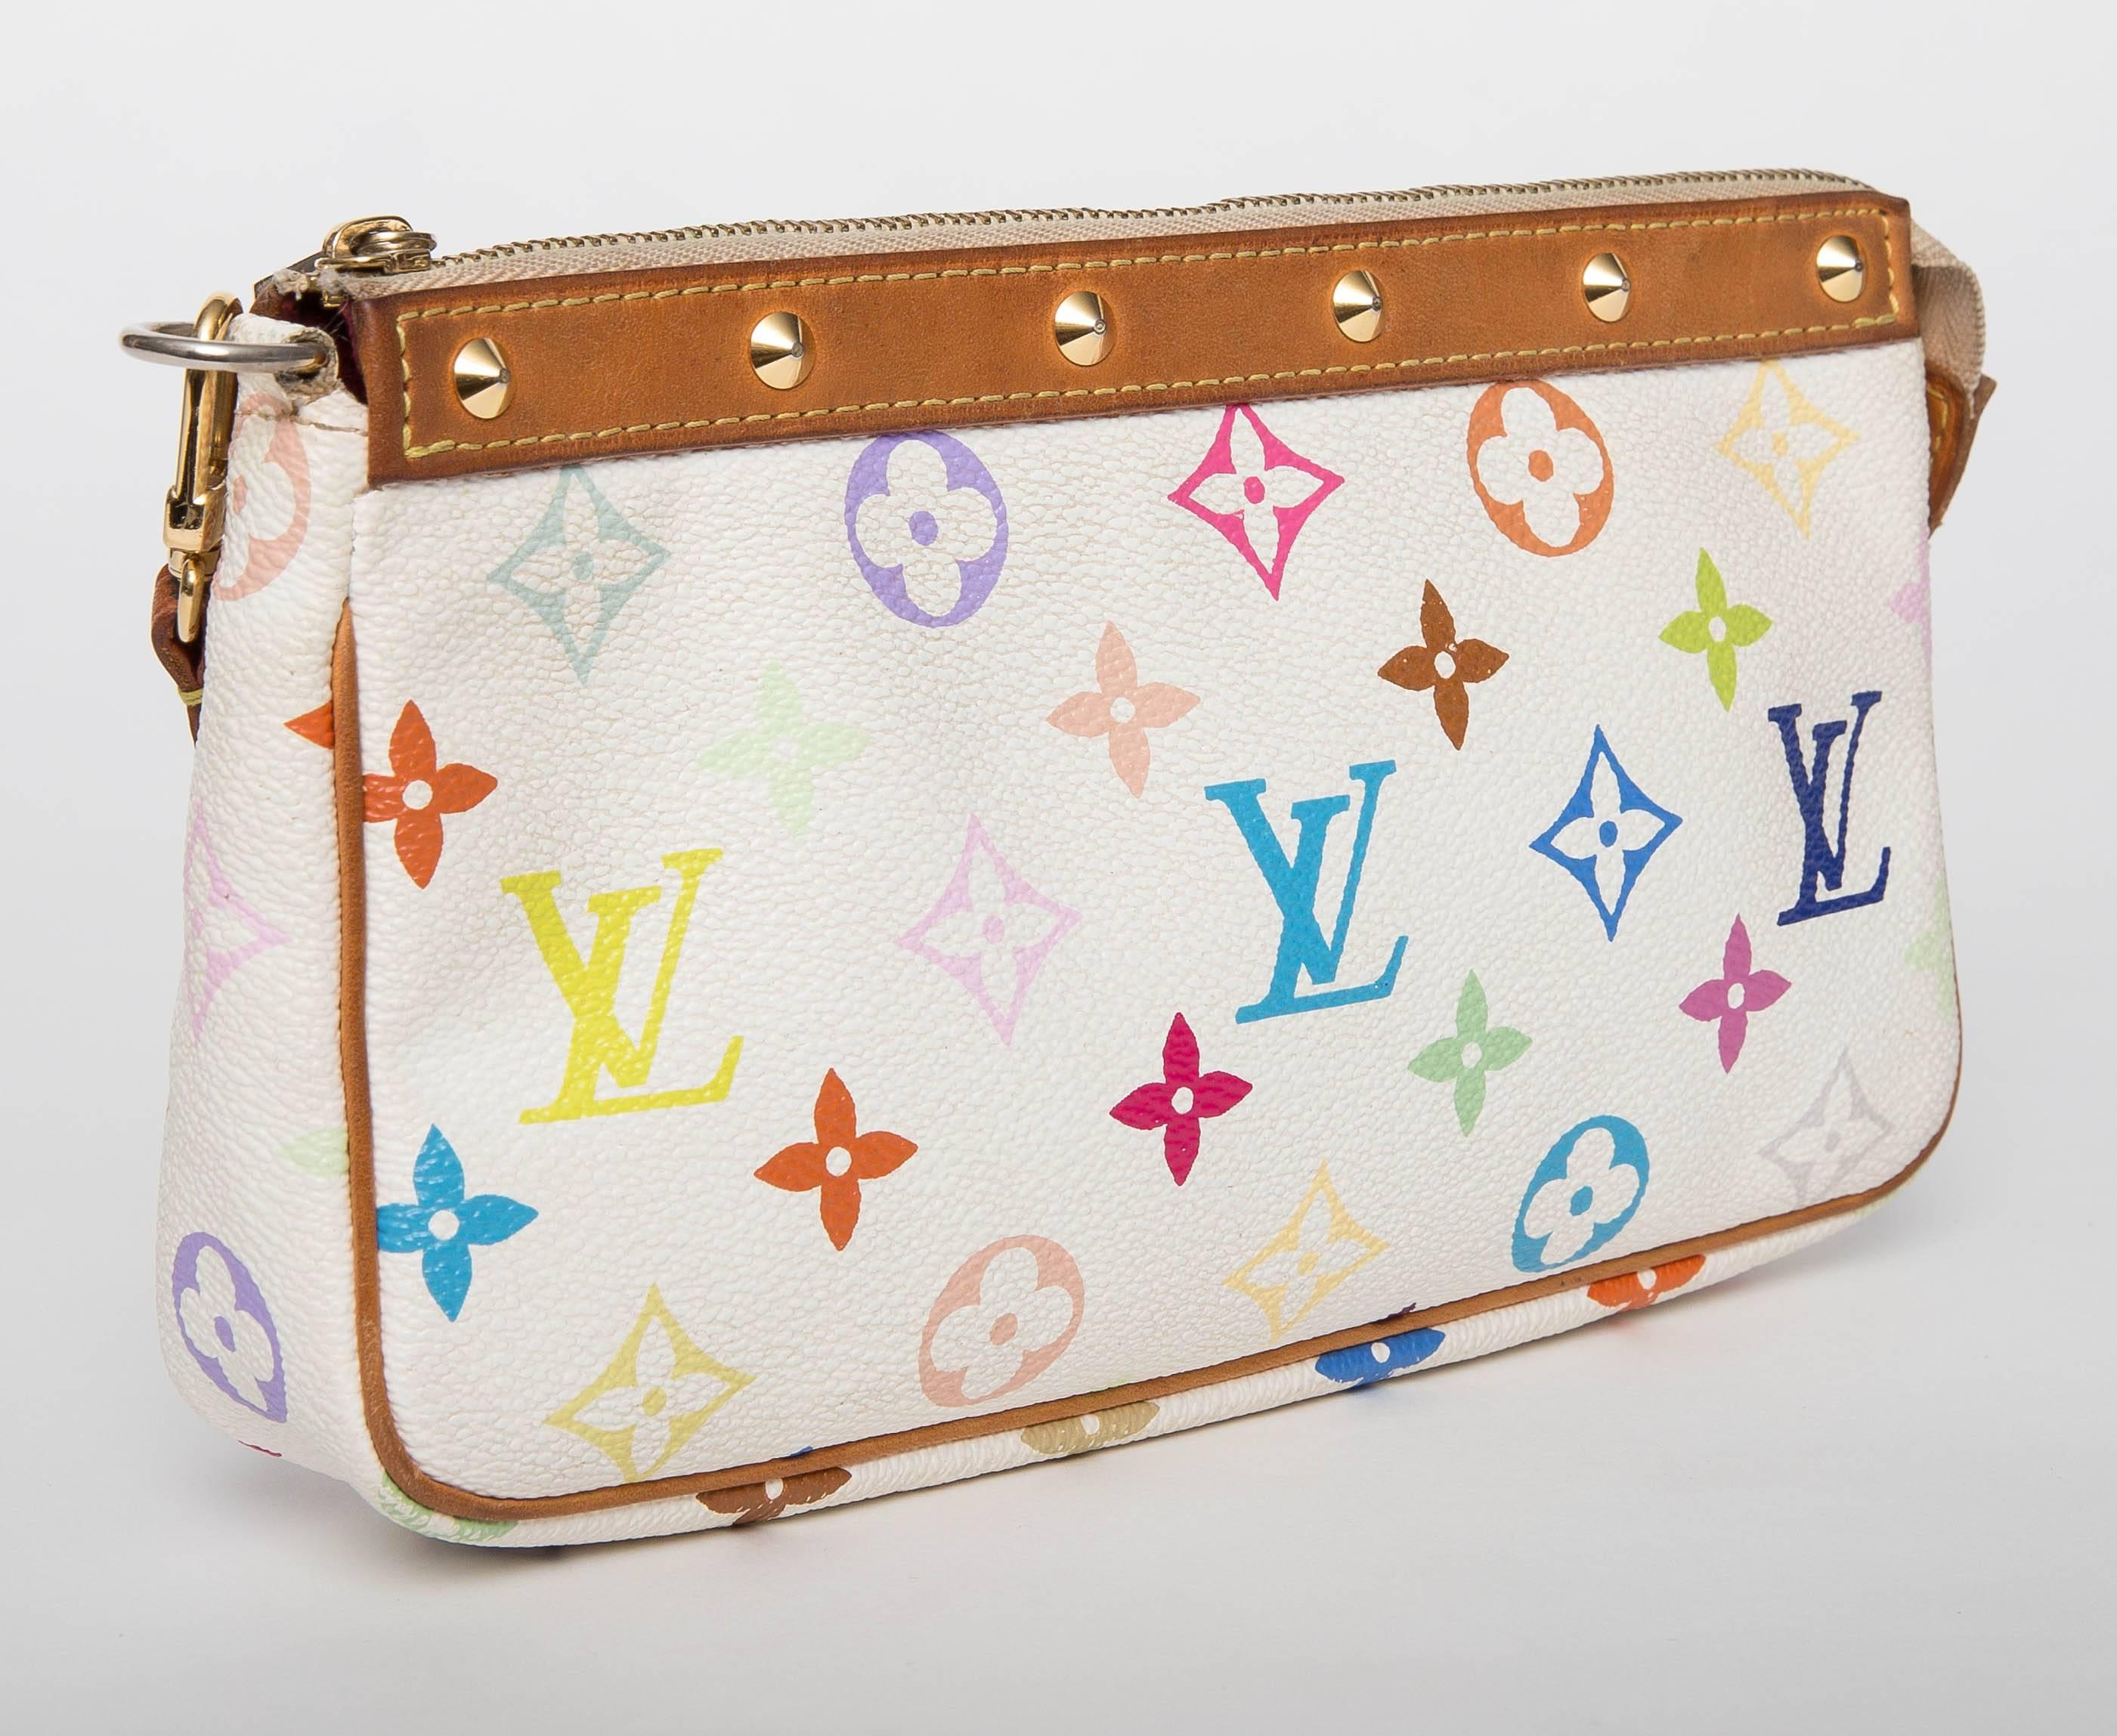 Louis Vuitton Murakami Multicolore Studded Pochette Handle Bag feautures single zip closure with metal zipper pull ,removable flat studded leather handle,and goldtone hardware.

Comes with original dustbag.

